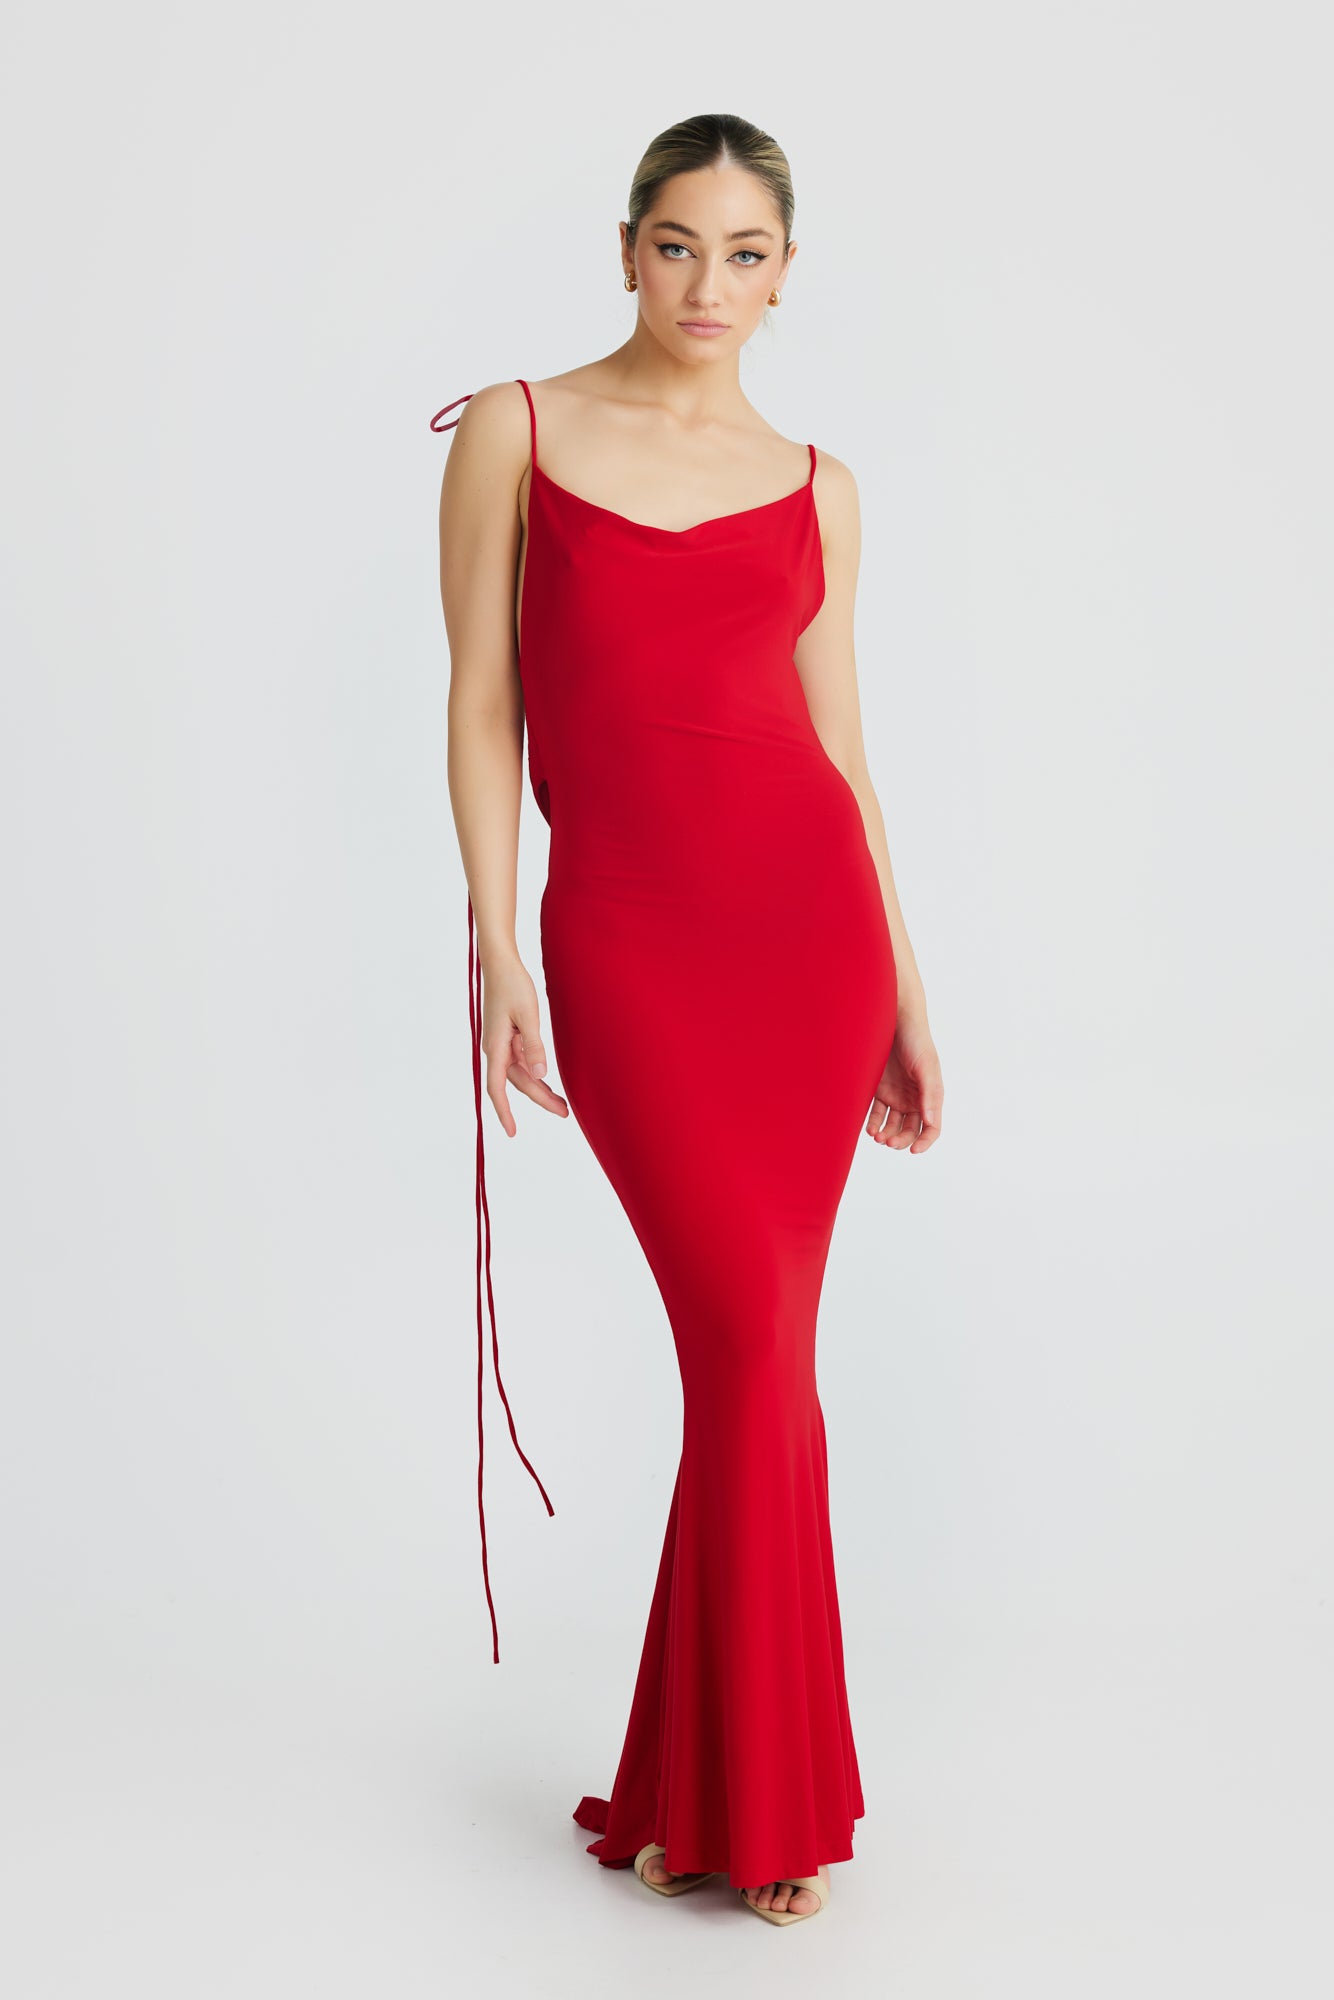 CRISTINA MERMAID GOWN - RED